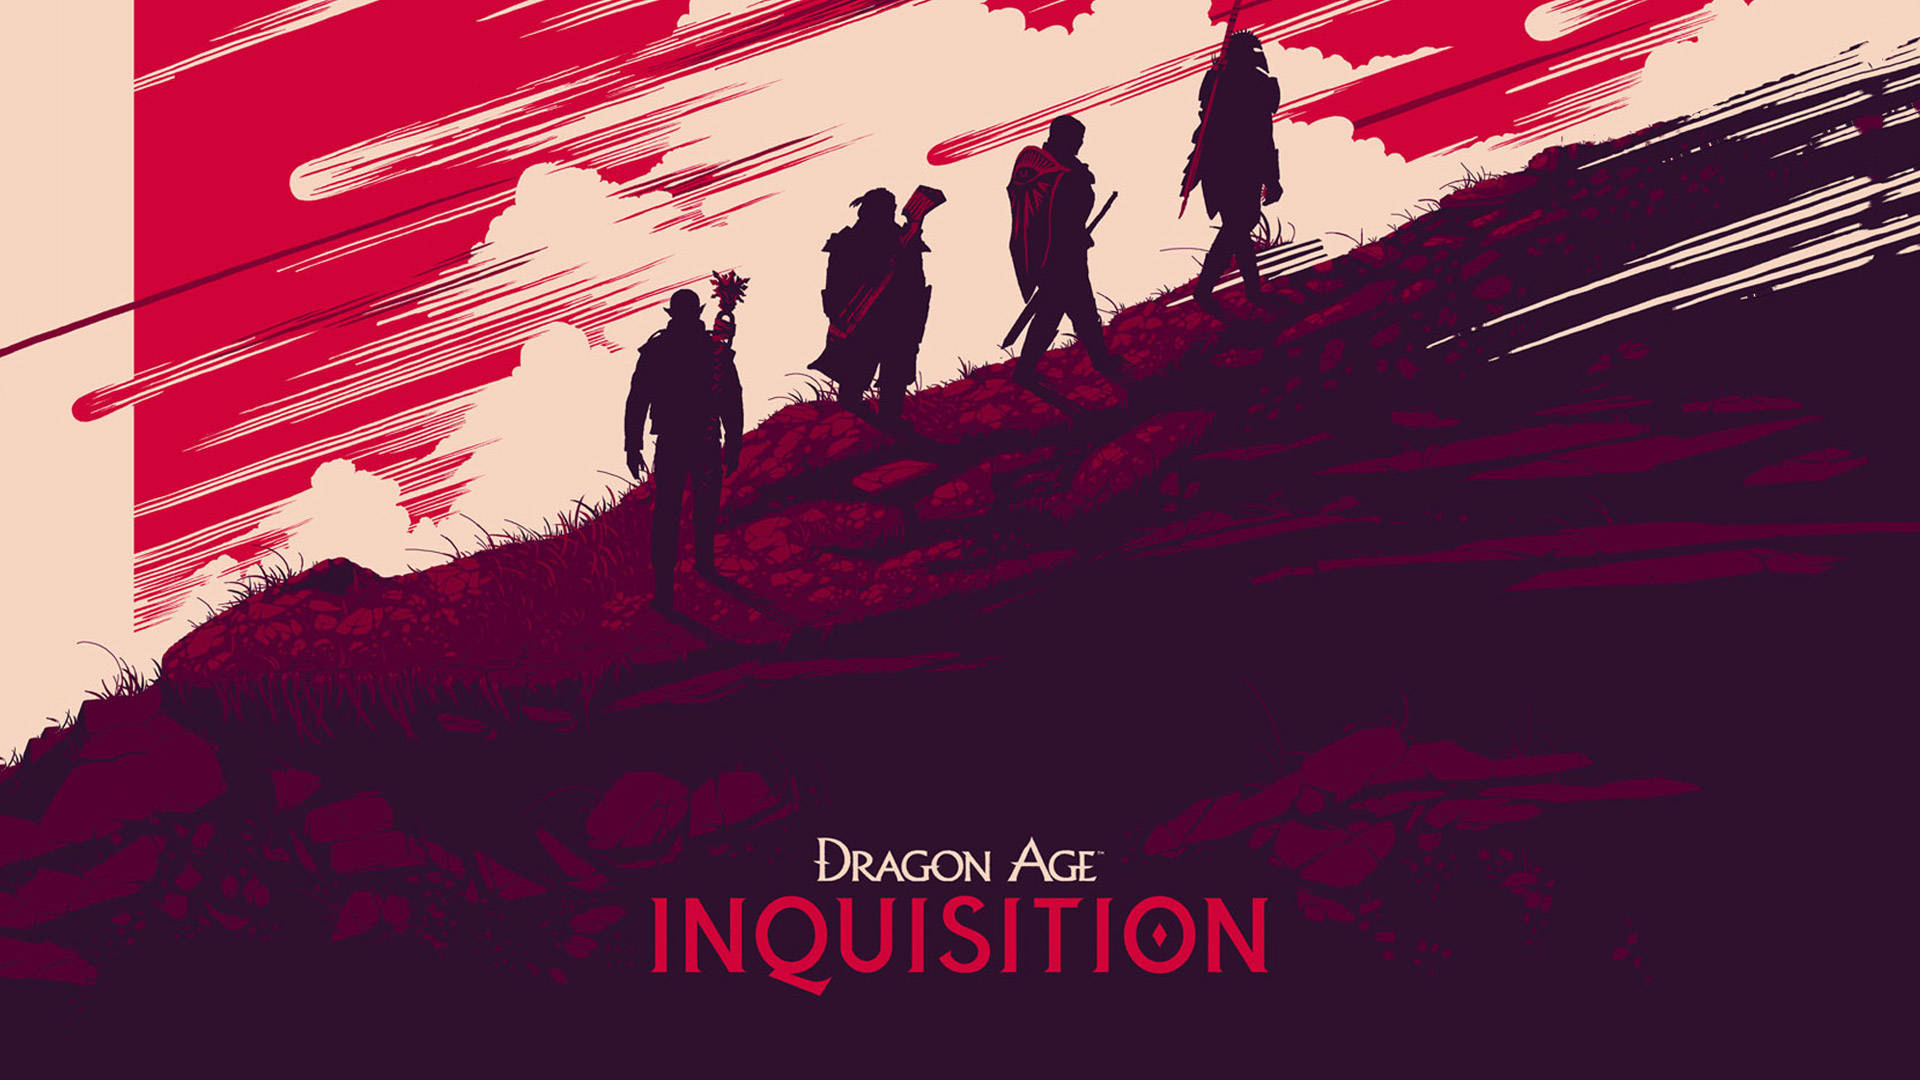 Red Dragon Age Inquisition Video Game Series Poster Wallpaper